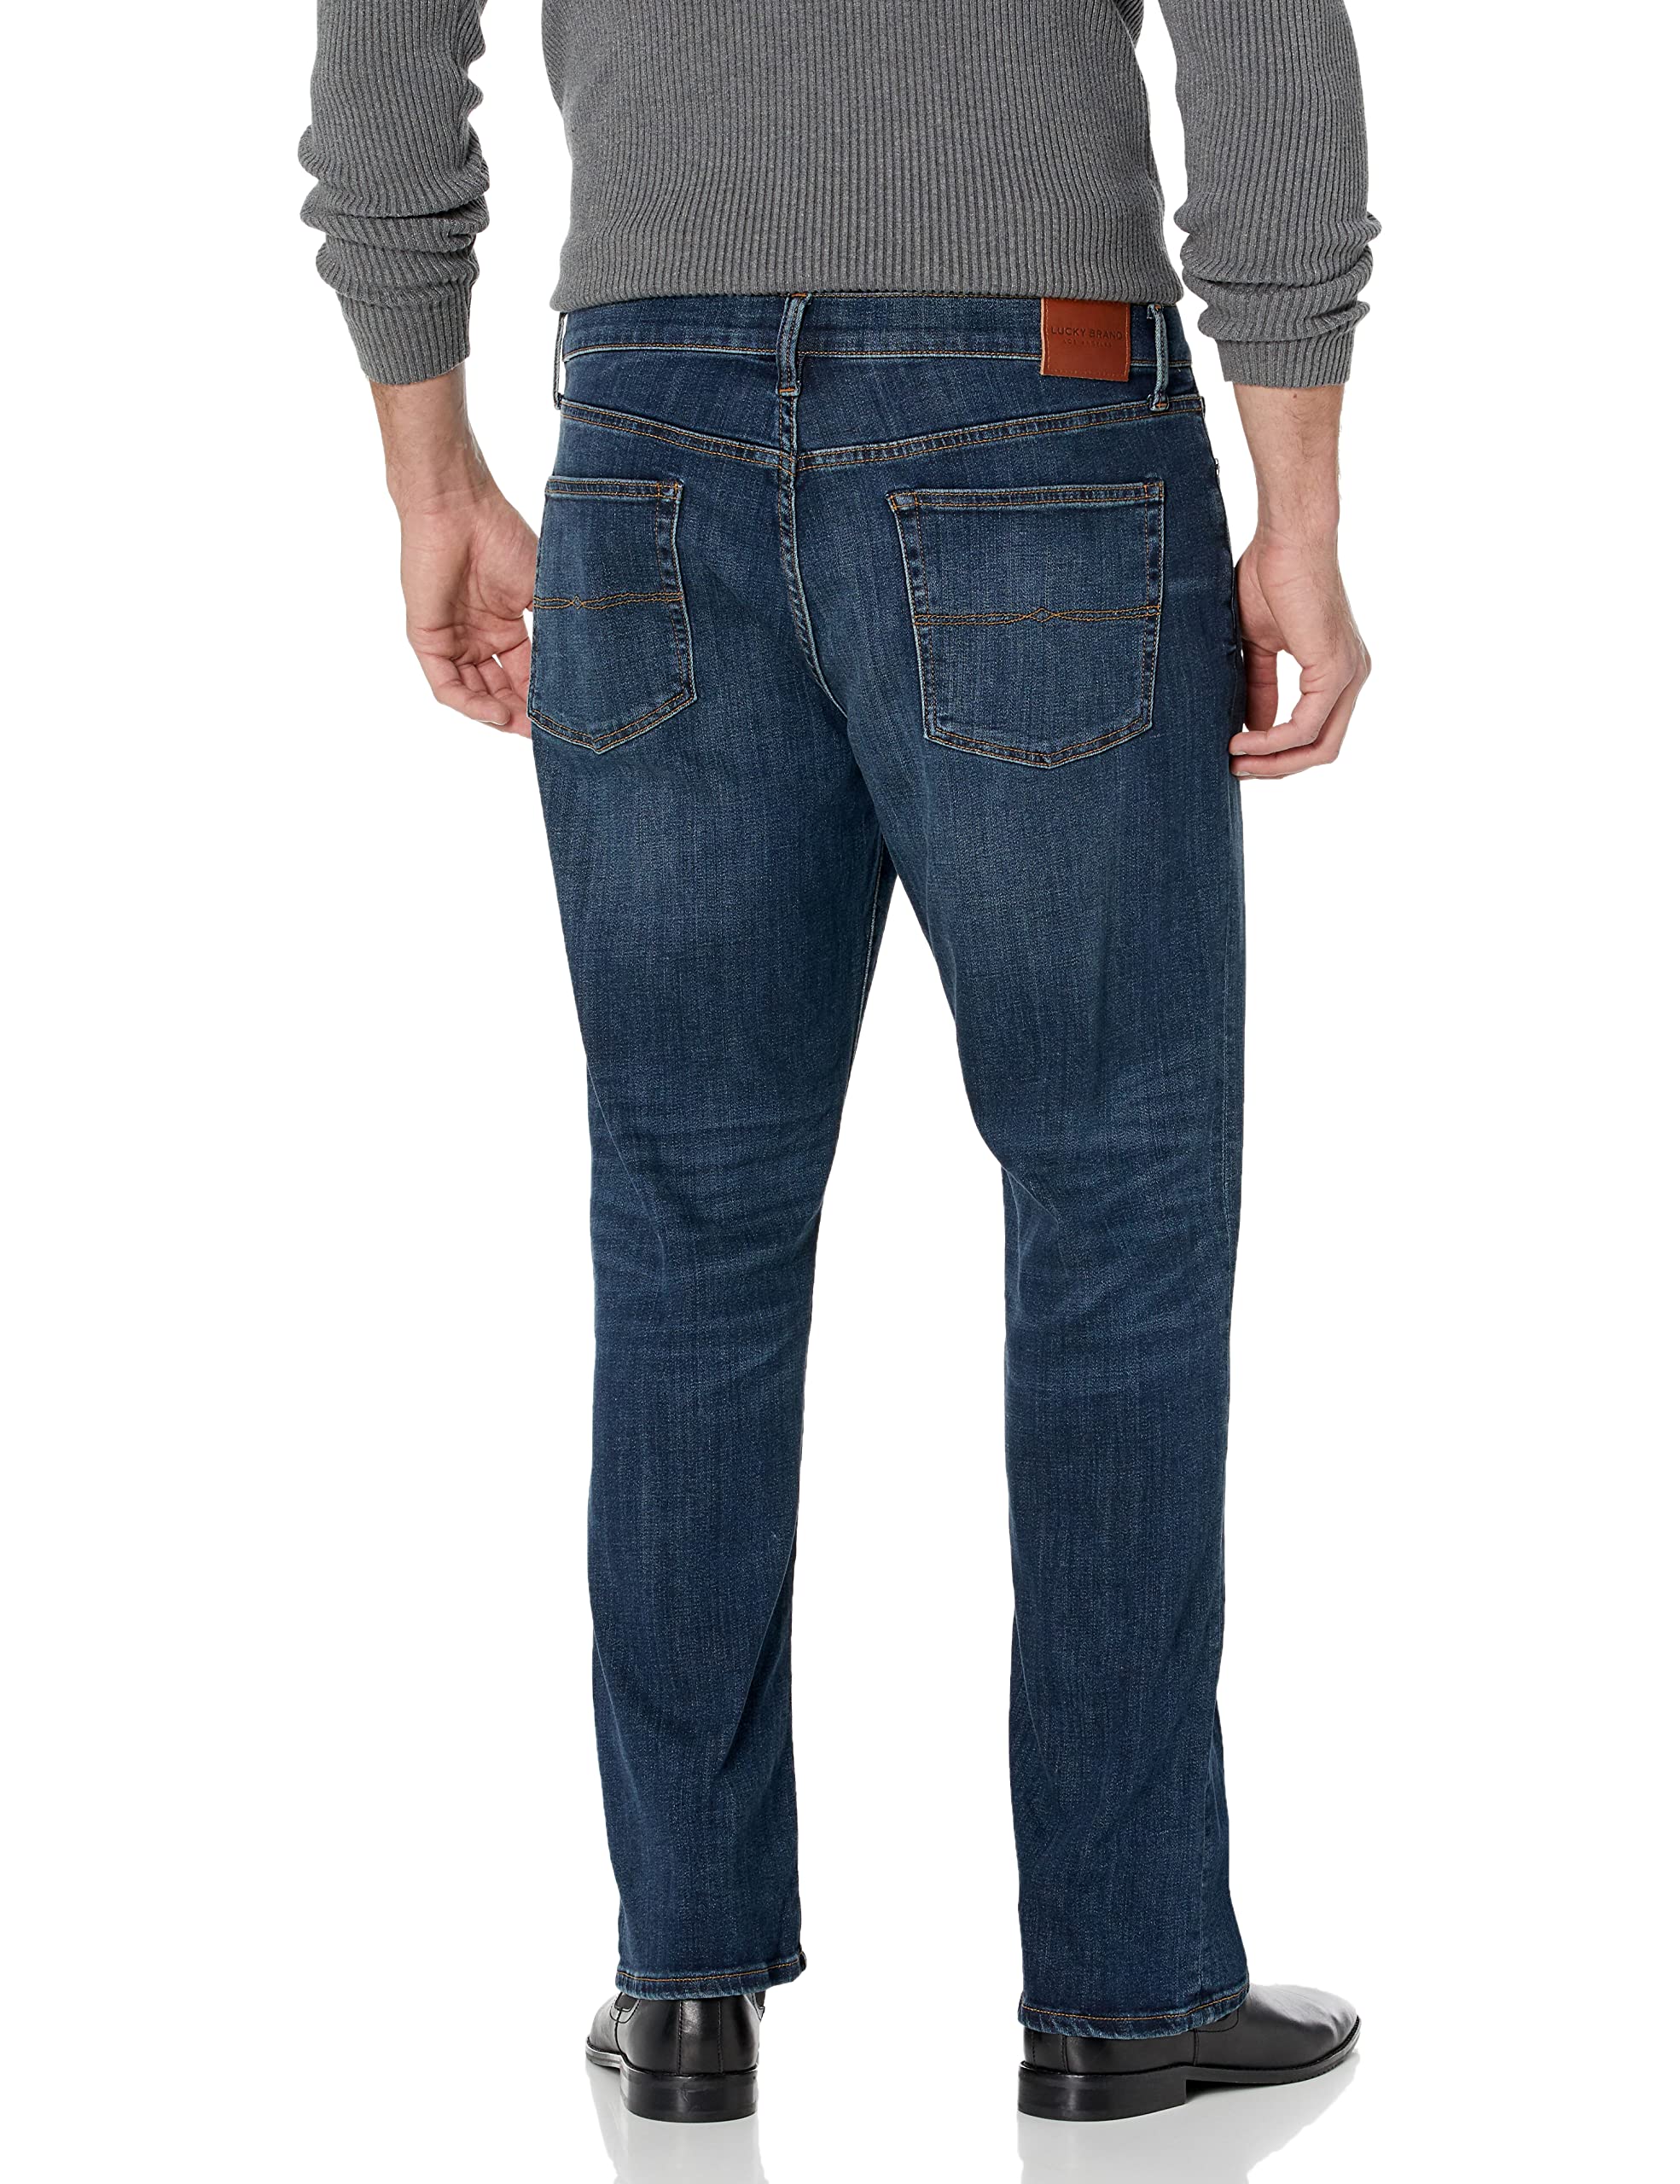 Lucky Brand Men's Easy Rider Bootcut Coolmax Stretch Jean